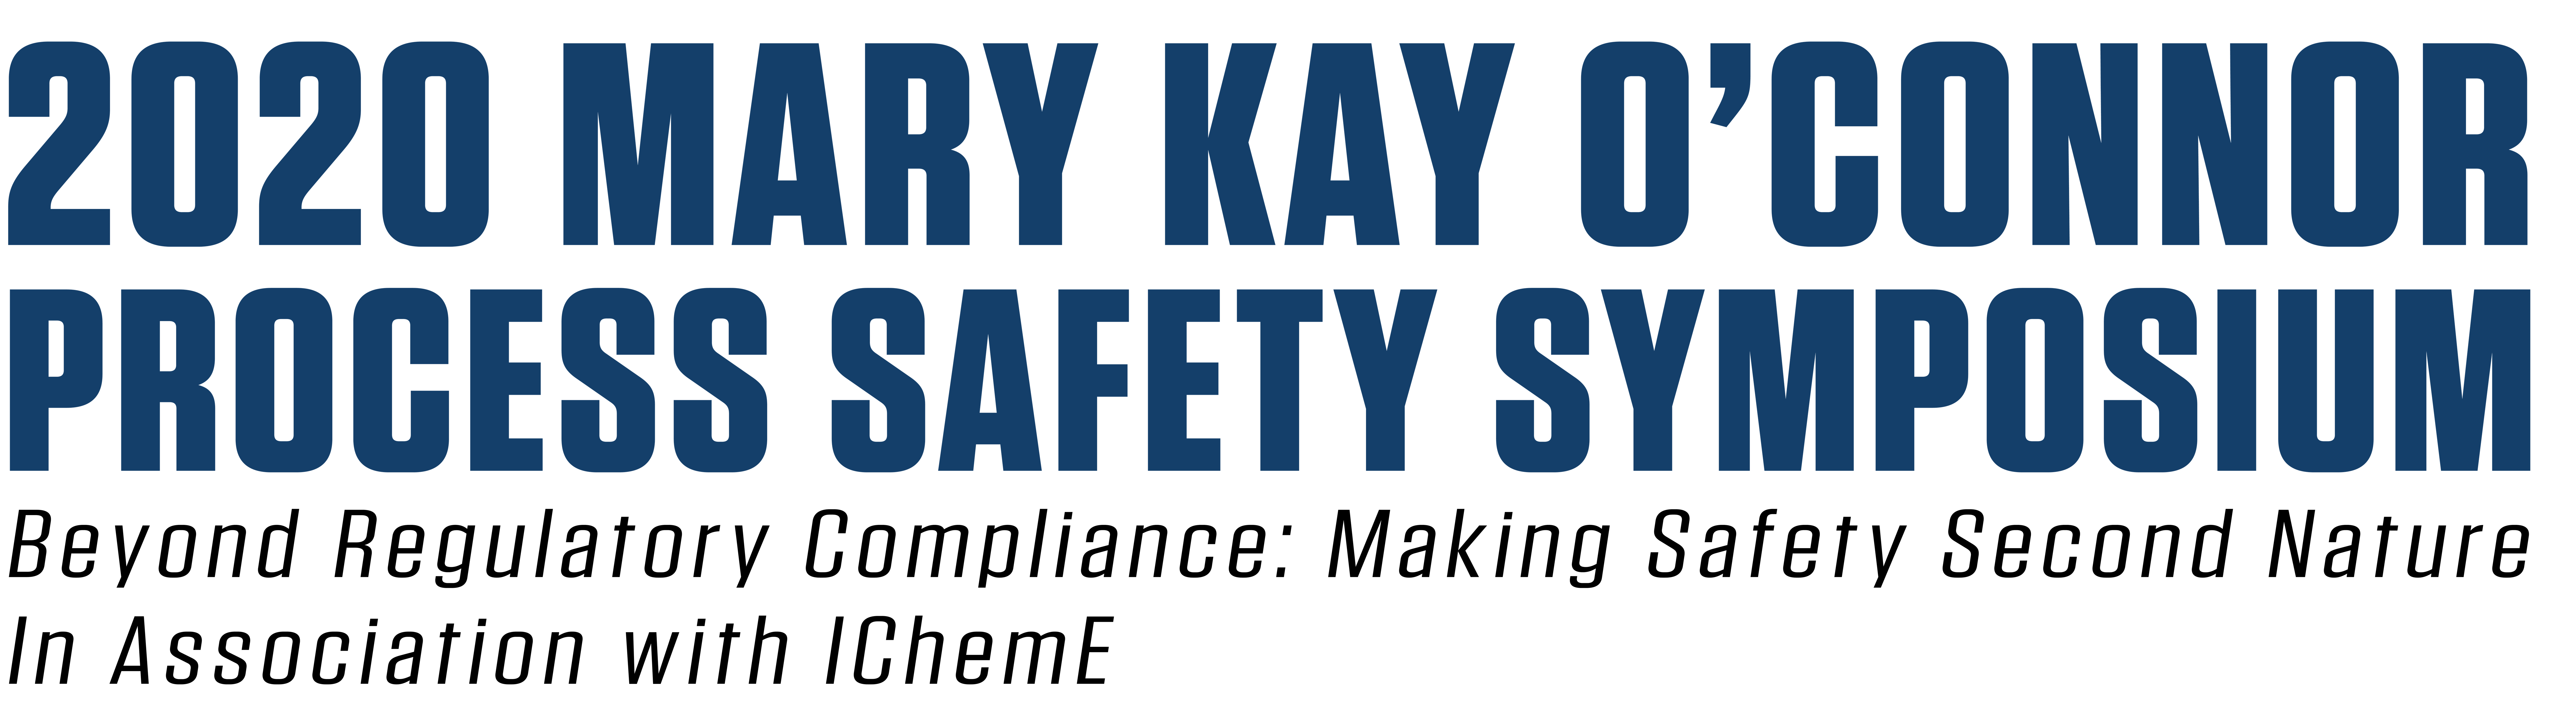 2020 MARY KAY O’CONNOR PROCESS SAFETY SYMPOSIUM